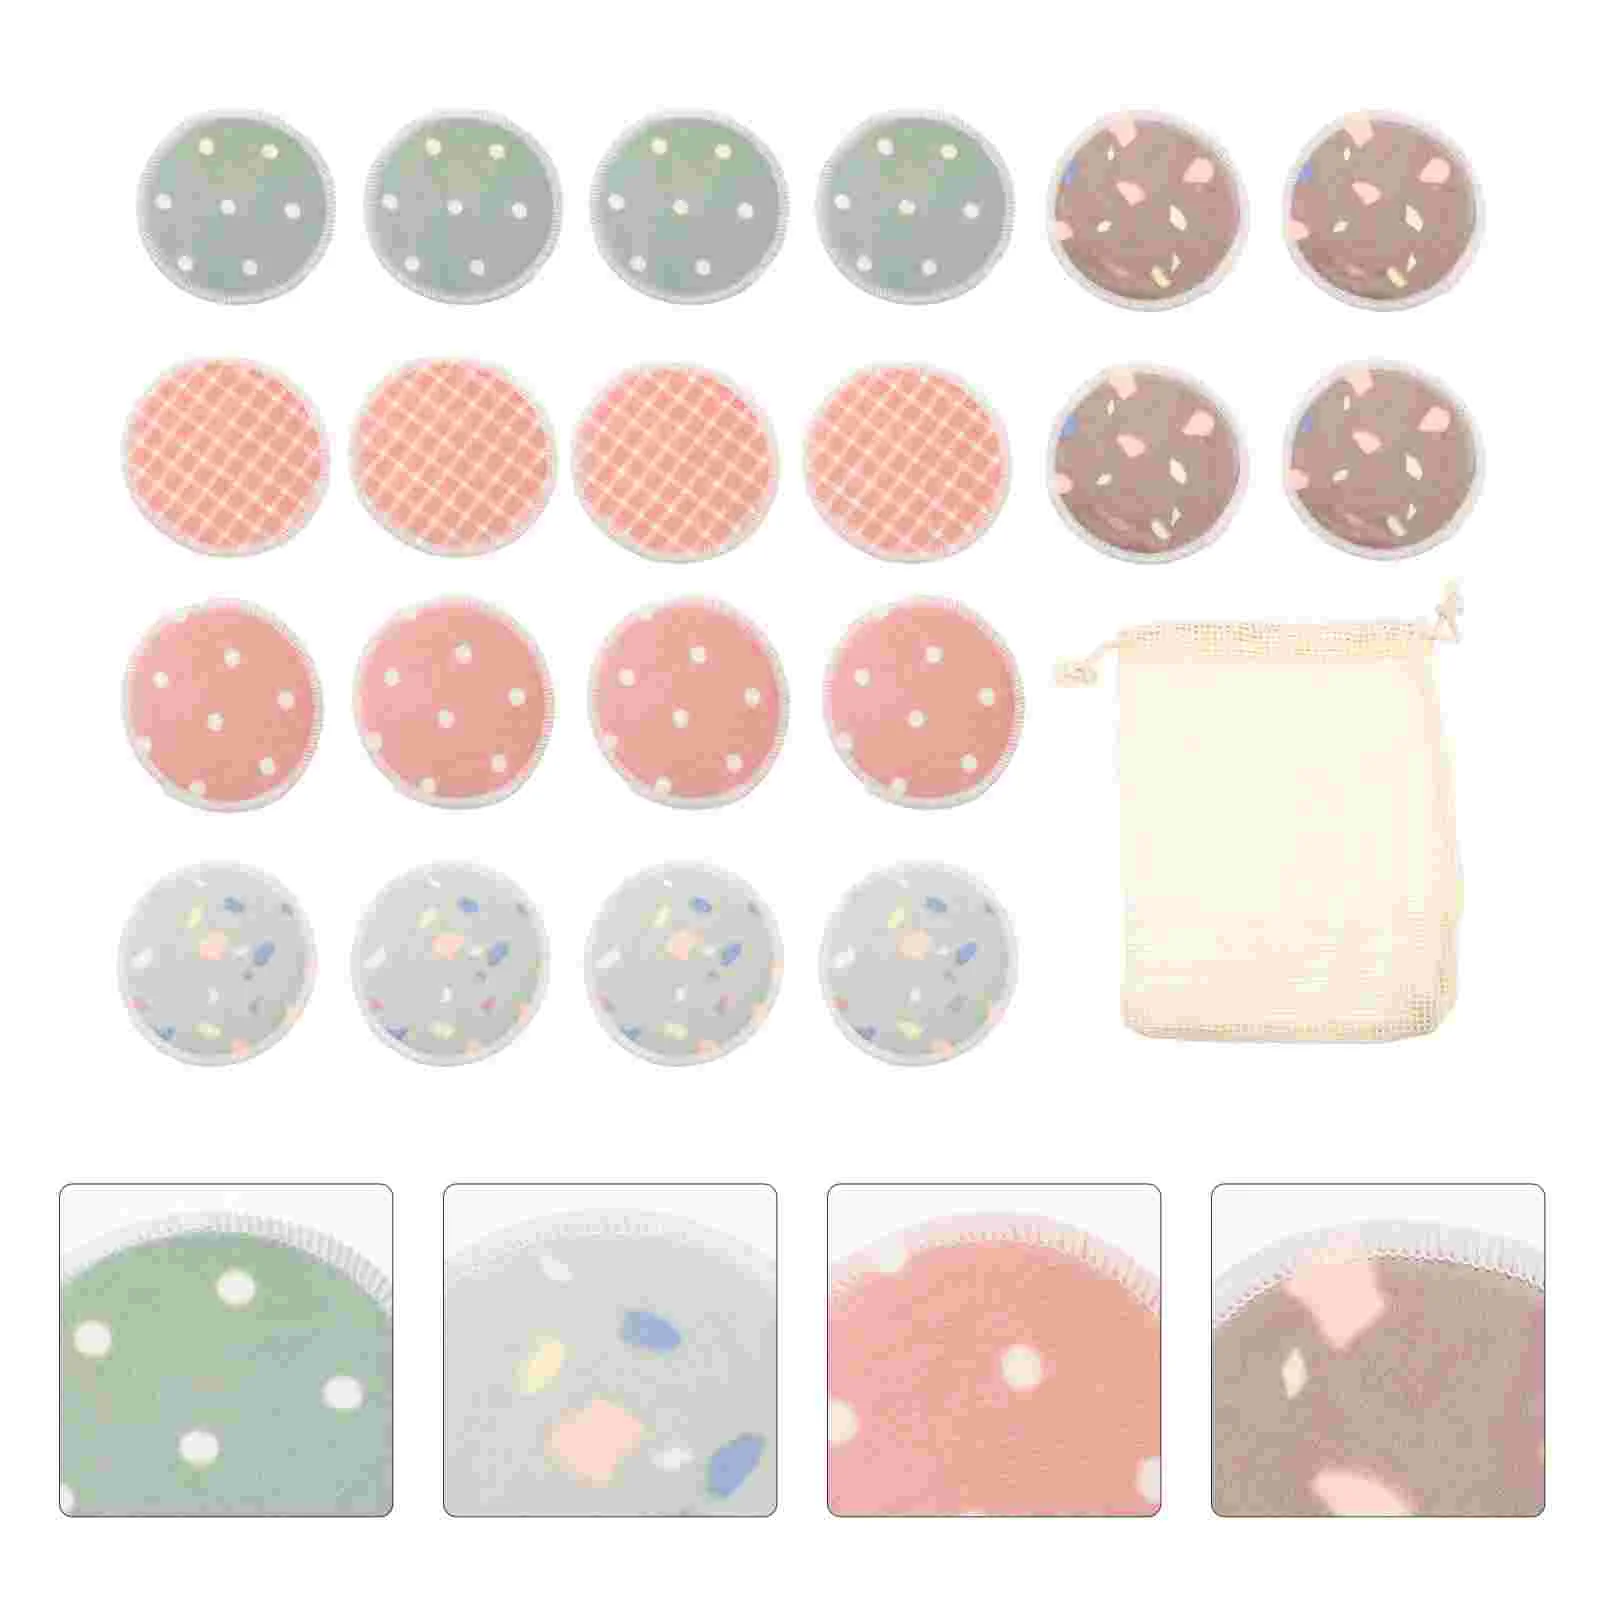 Makeup Cleanser Reusable Remover Pads Face Toner Natural Bamboo Cotton Rounds Wipe Cushion Foundation Puff Towel